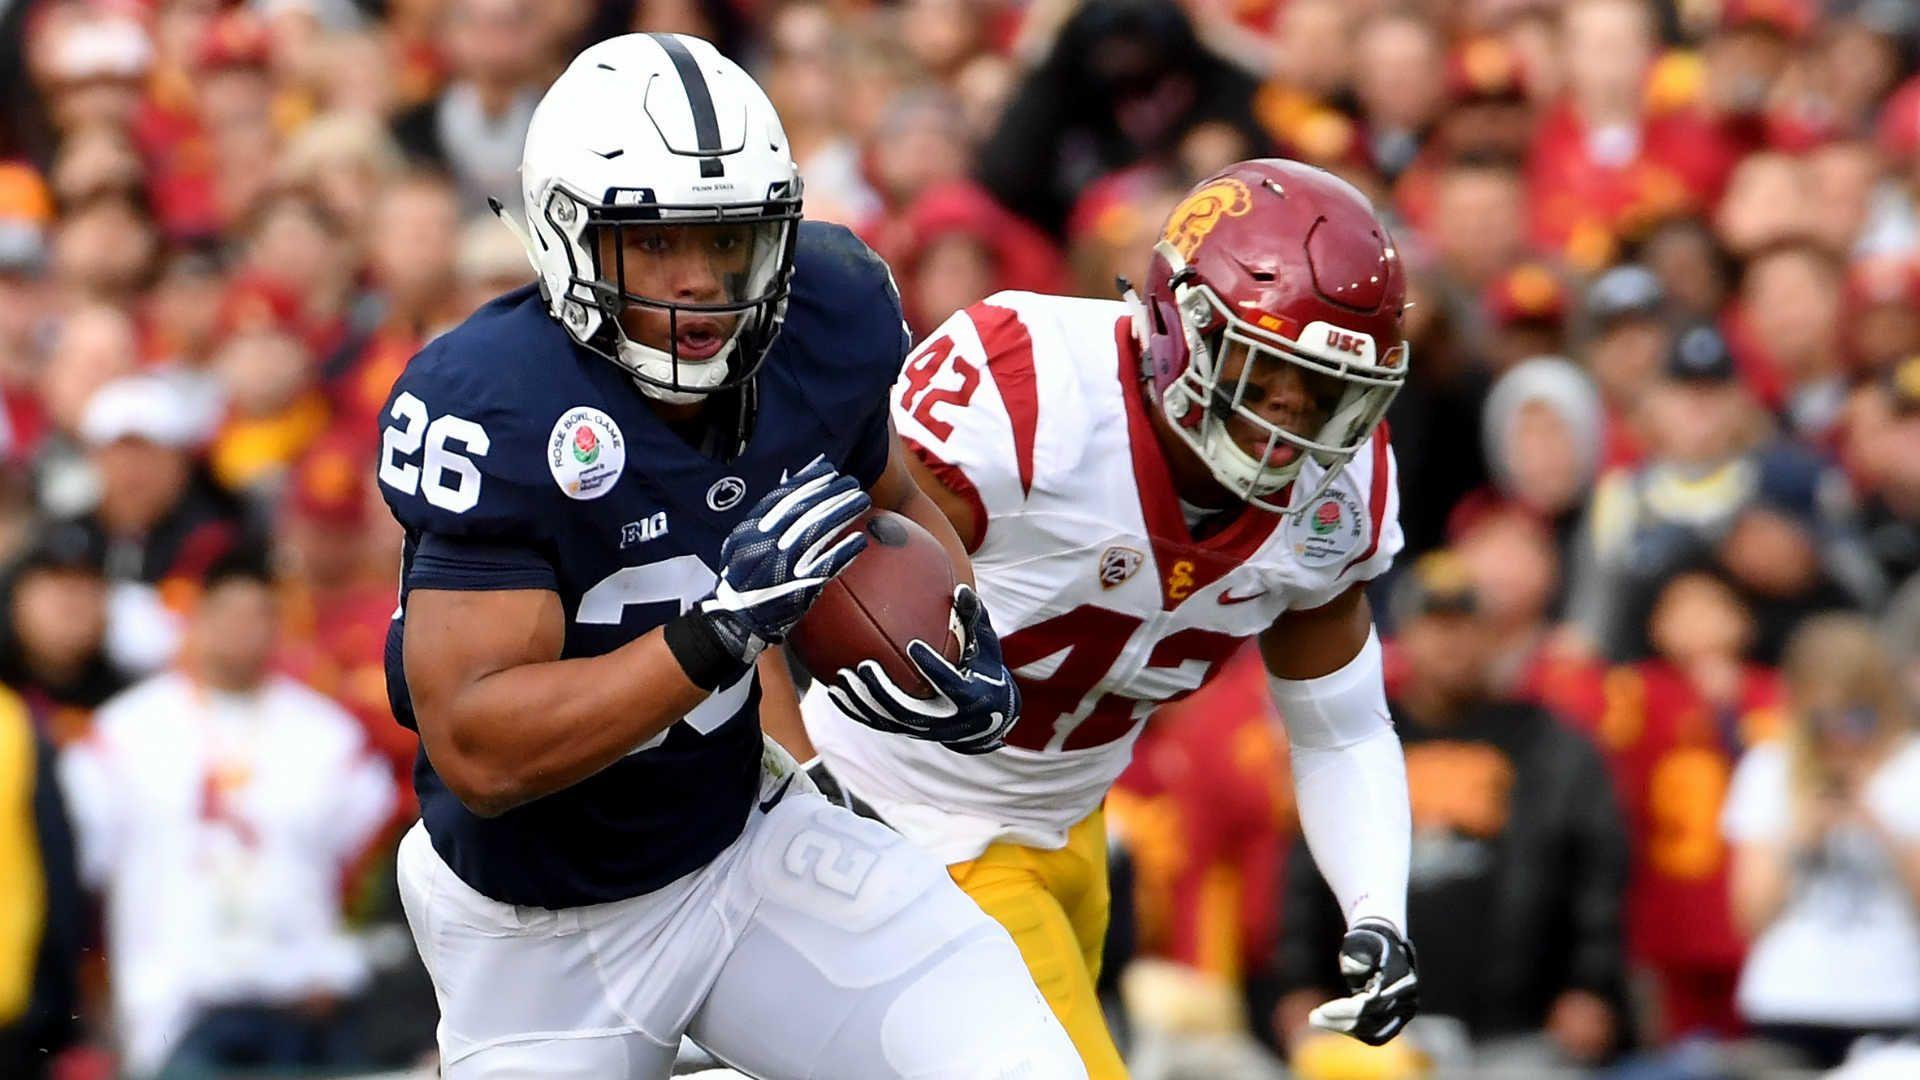 Saquon Barkley 79 Yard Touchdown Gives Penn State First Lead